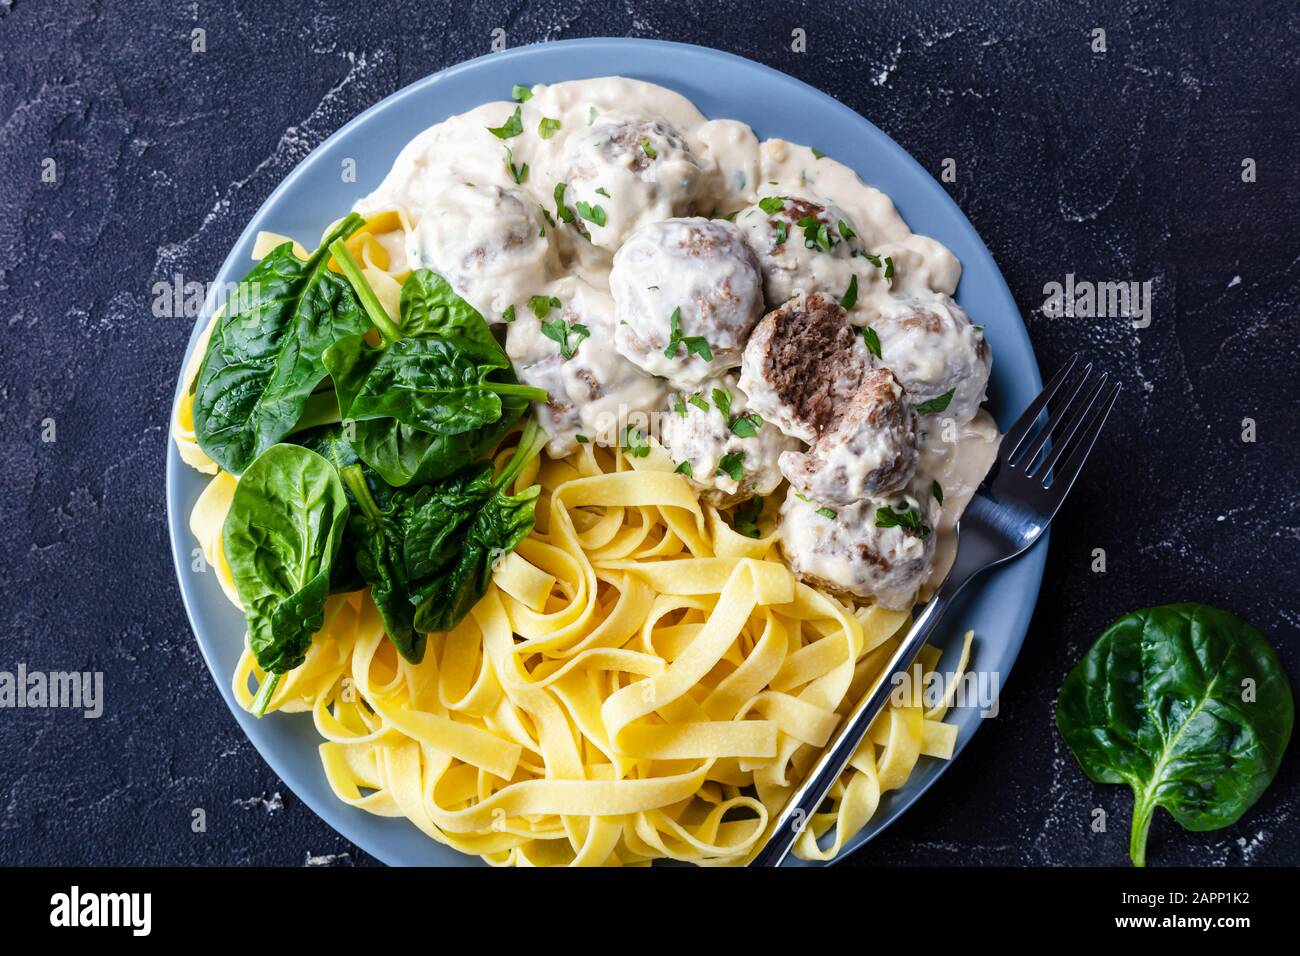 classic Swedish meatballs served with egg noodle and fresh spinach leaves on a plate with silver fork on a concrete kitchen table, horizontal view fro Stock Photo